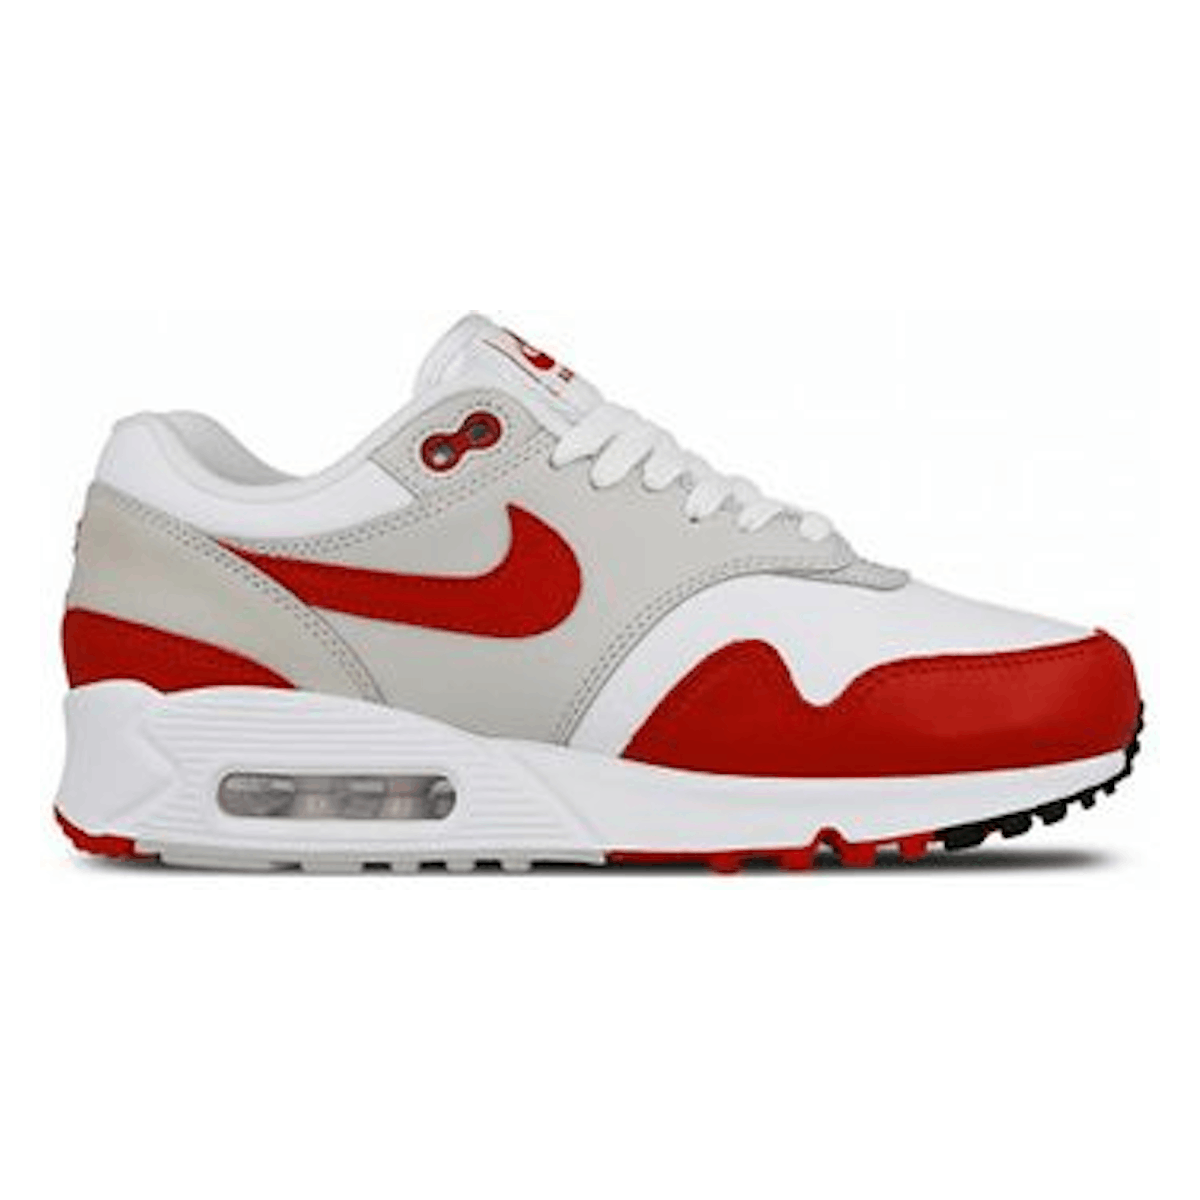 Nike Air Max 90/1 WMNS "University Red"